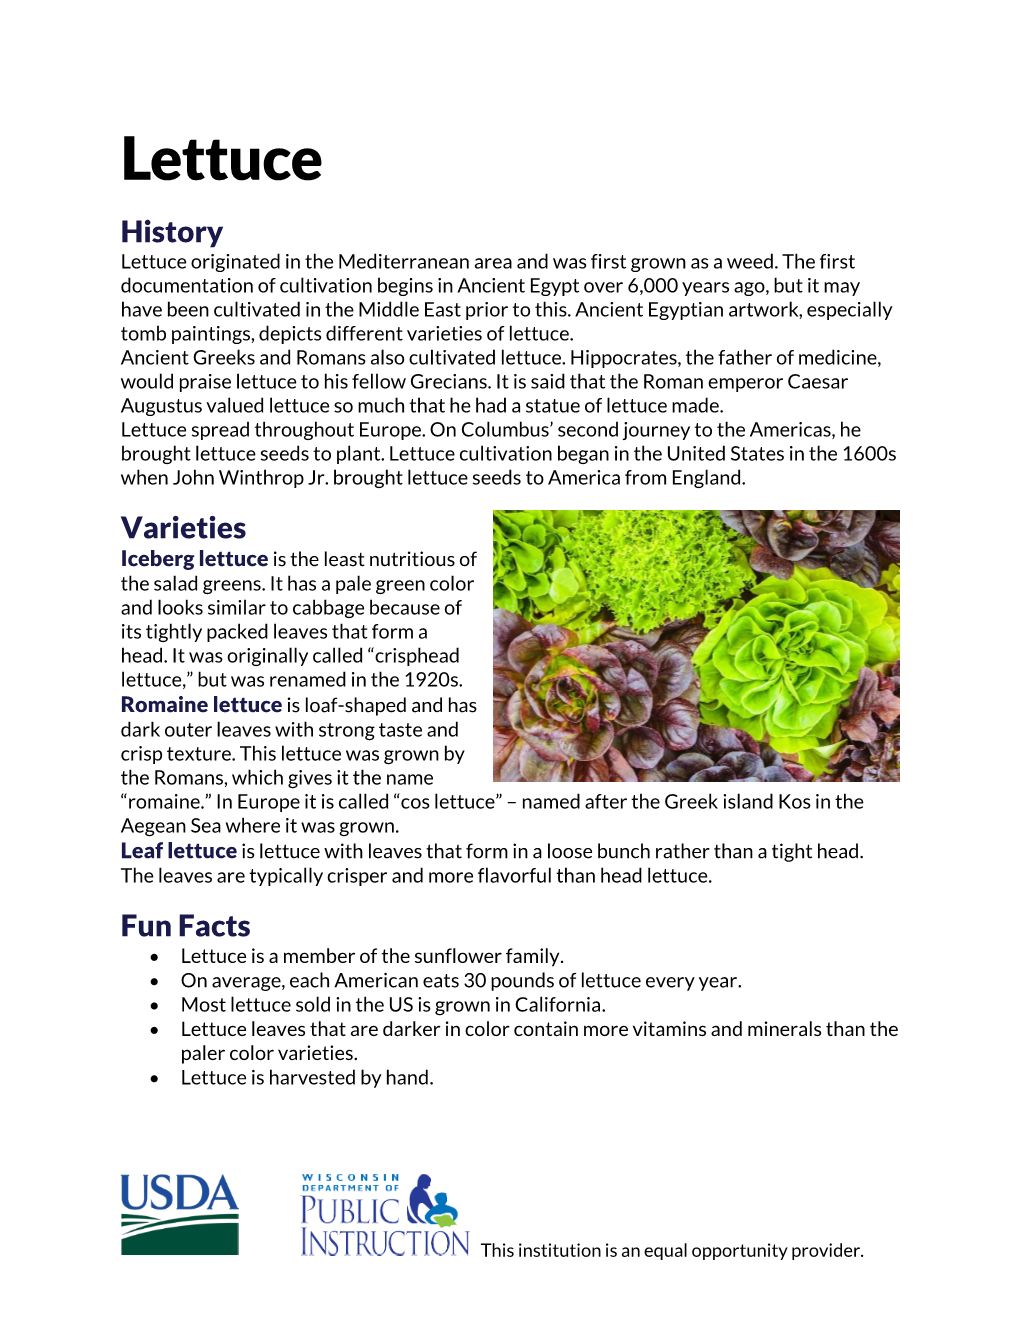 Lettuce History Lettuce Originated in the Mediterranean Area and Was First Grown As a Weed